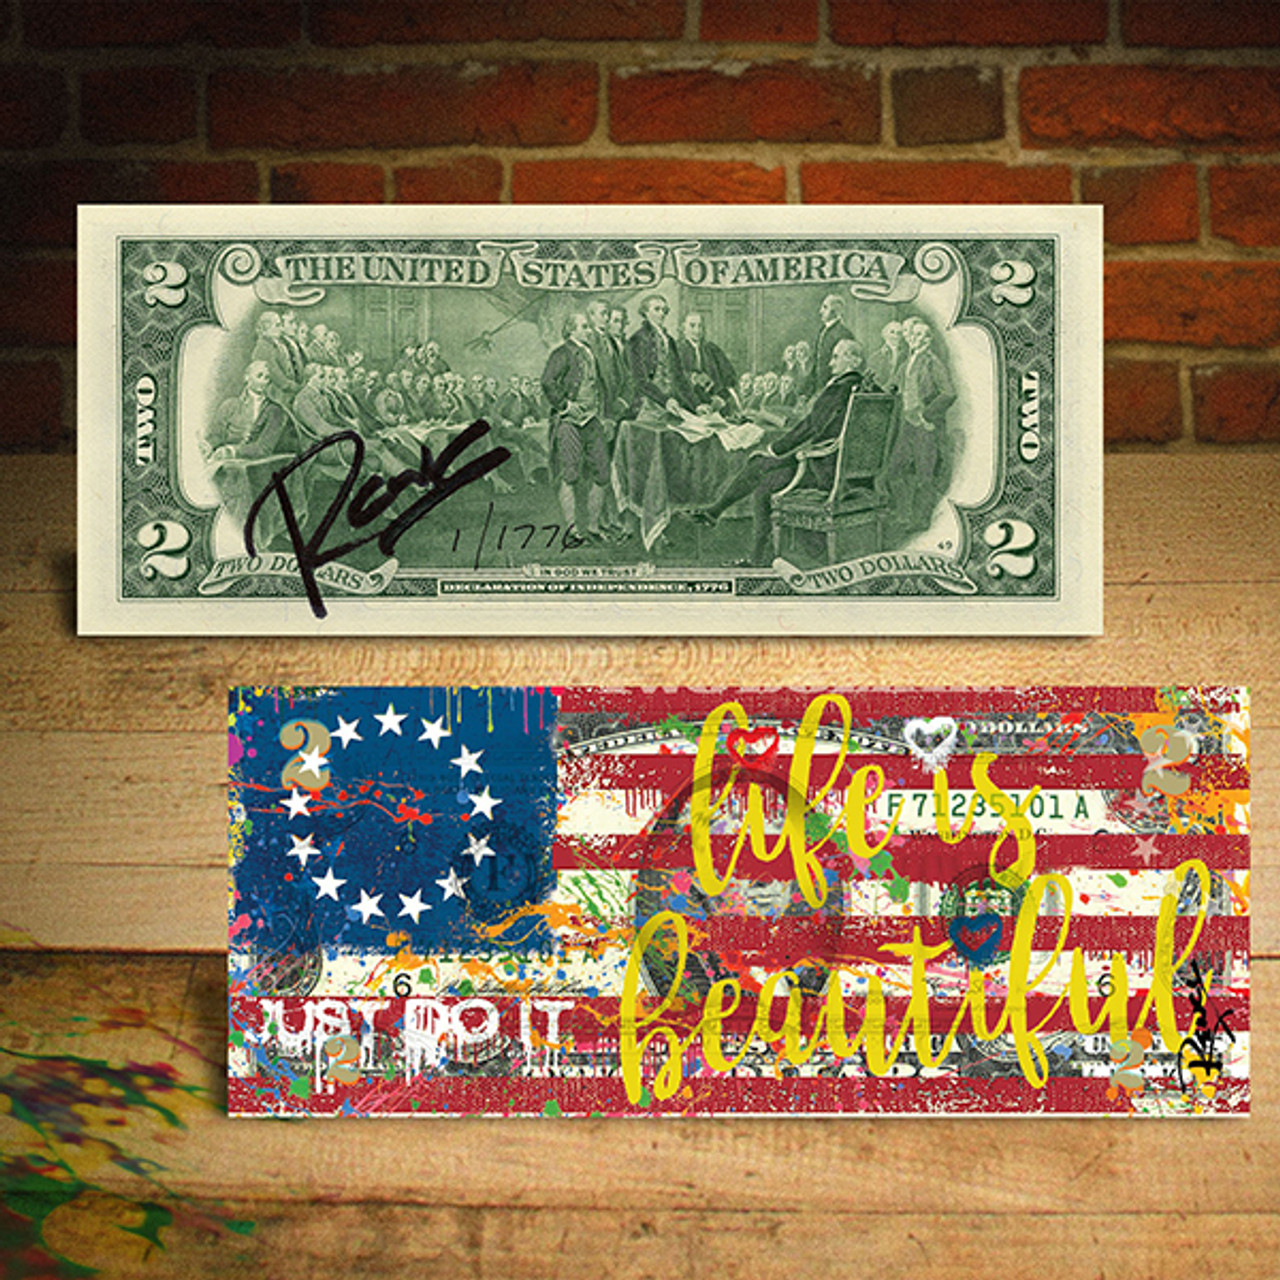 LIFE IS SUPREME Louis Vuitton Red Signed rency $2 Bill Limited Edition of 41